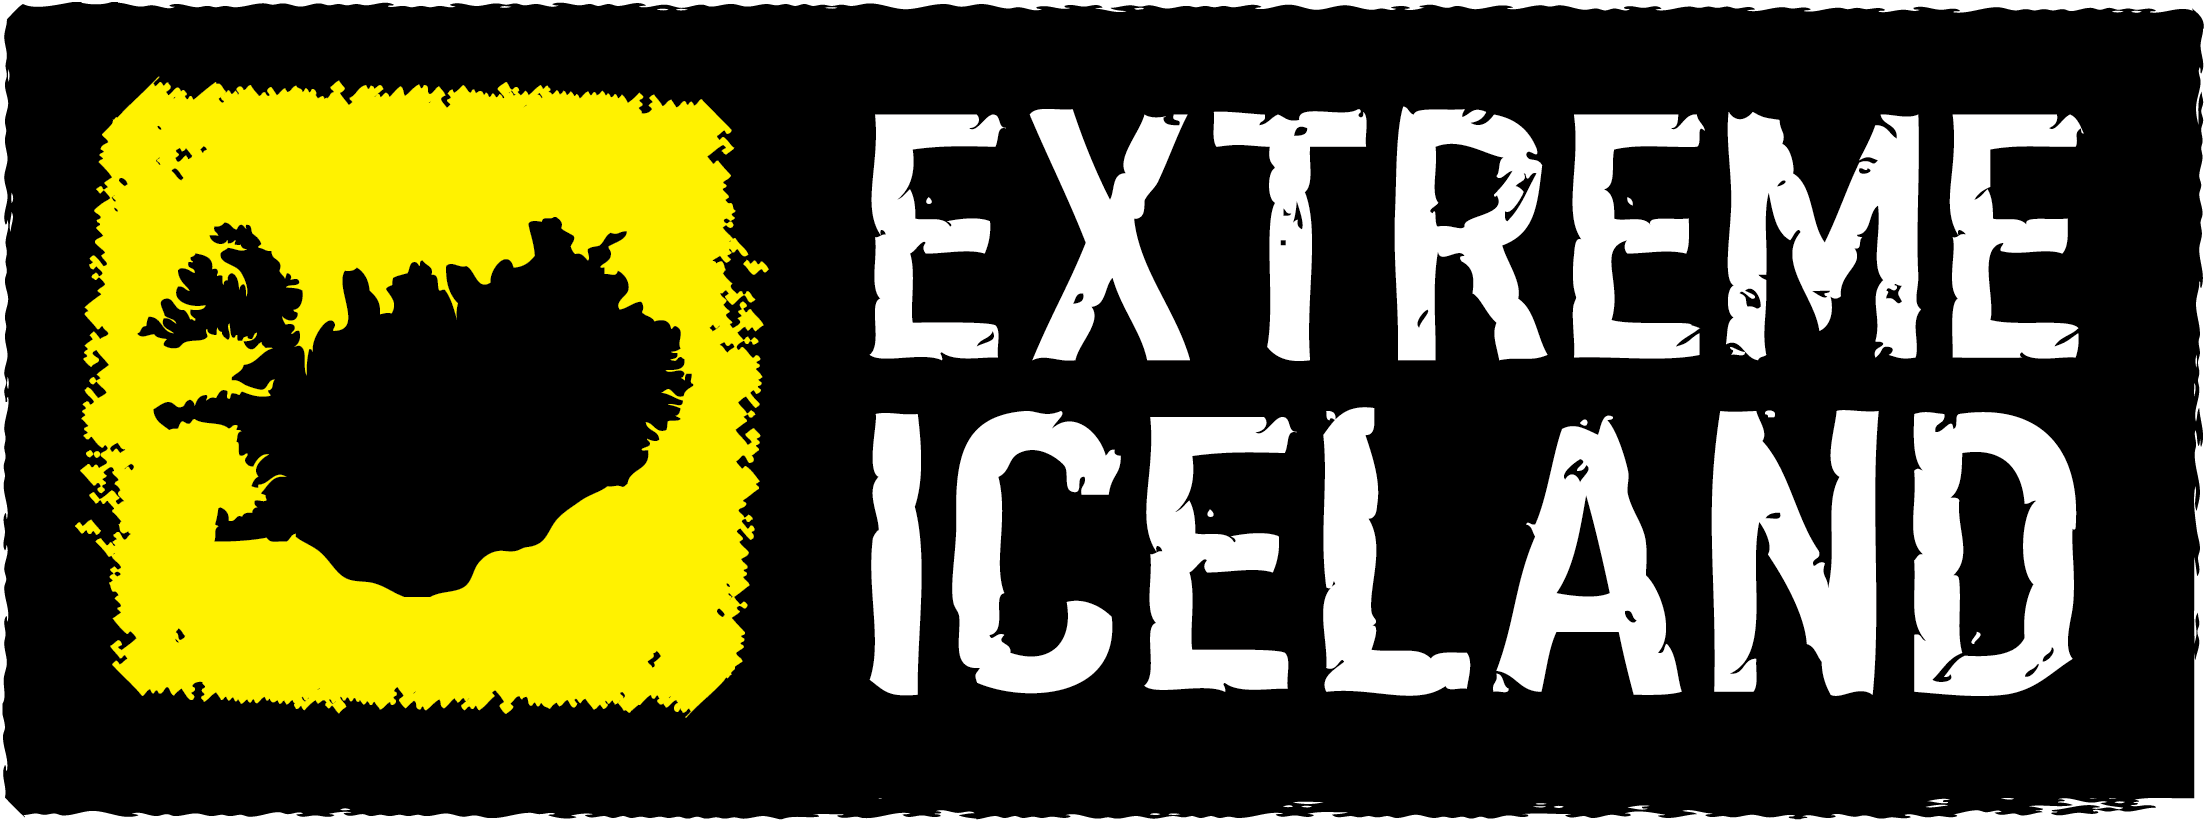 Iceland Logo - Extreme Iceland - Iceland Tours & Vacation Packages